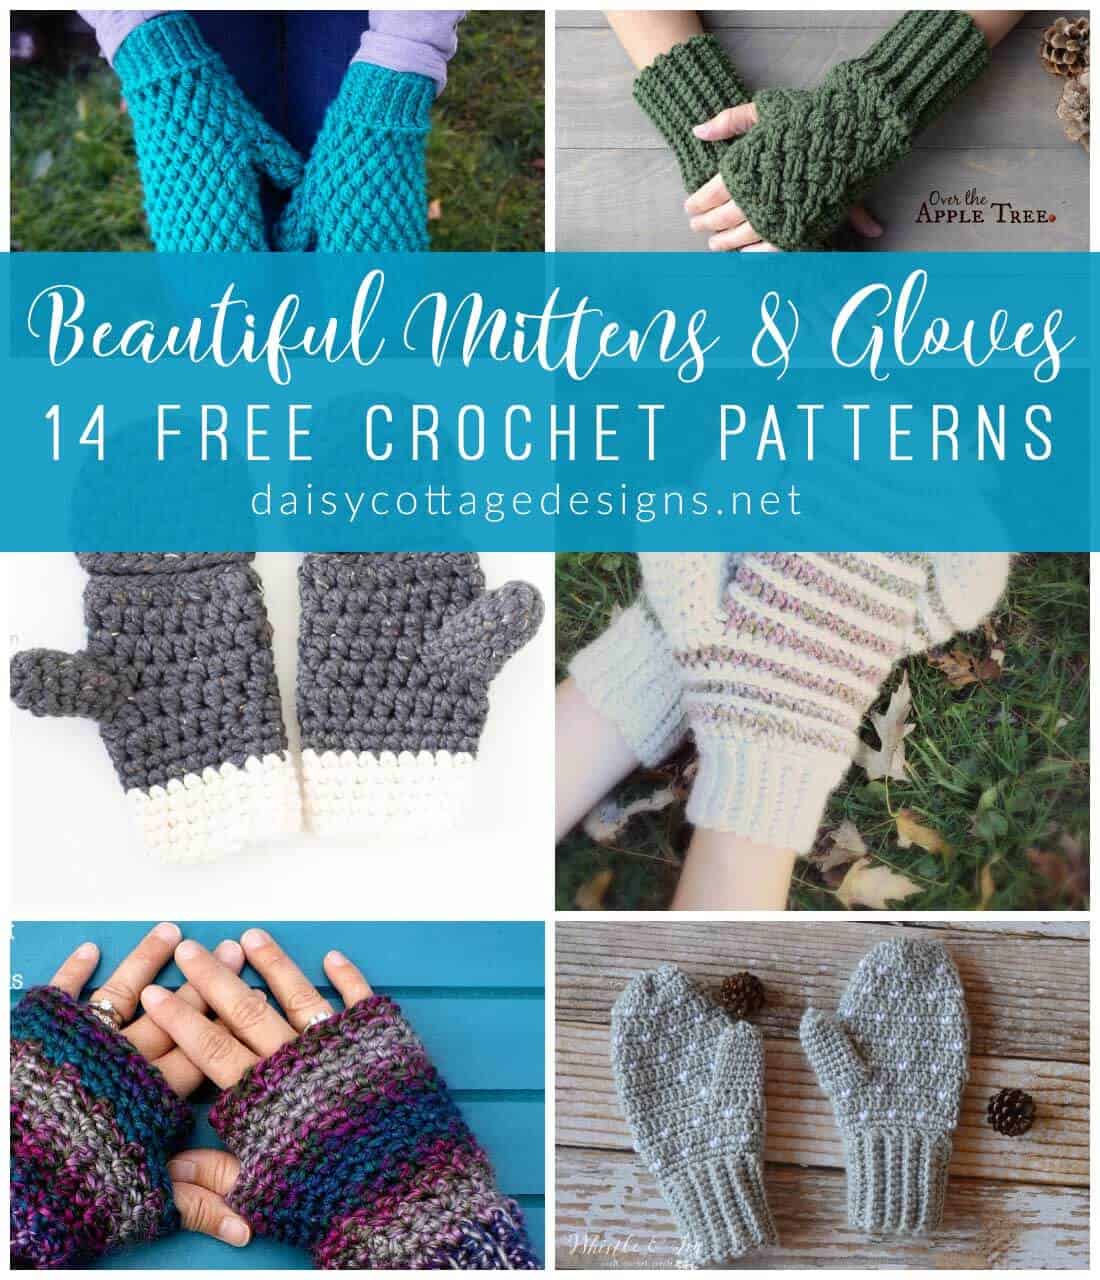 fingerless gloves crochet pattern | crochet mittens | crochet gloves | free crochet patterns | Use these crochet patterns to make a set of fingerless gloves or mittens. These free crochet patterns will have your fingers nice and toasty in no time!